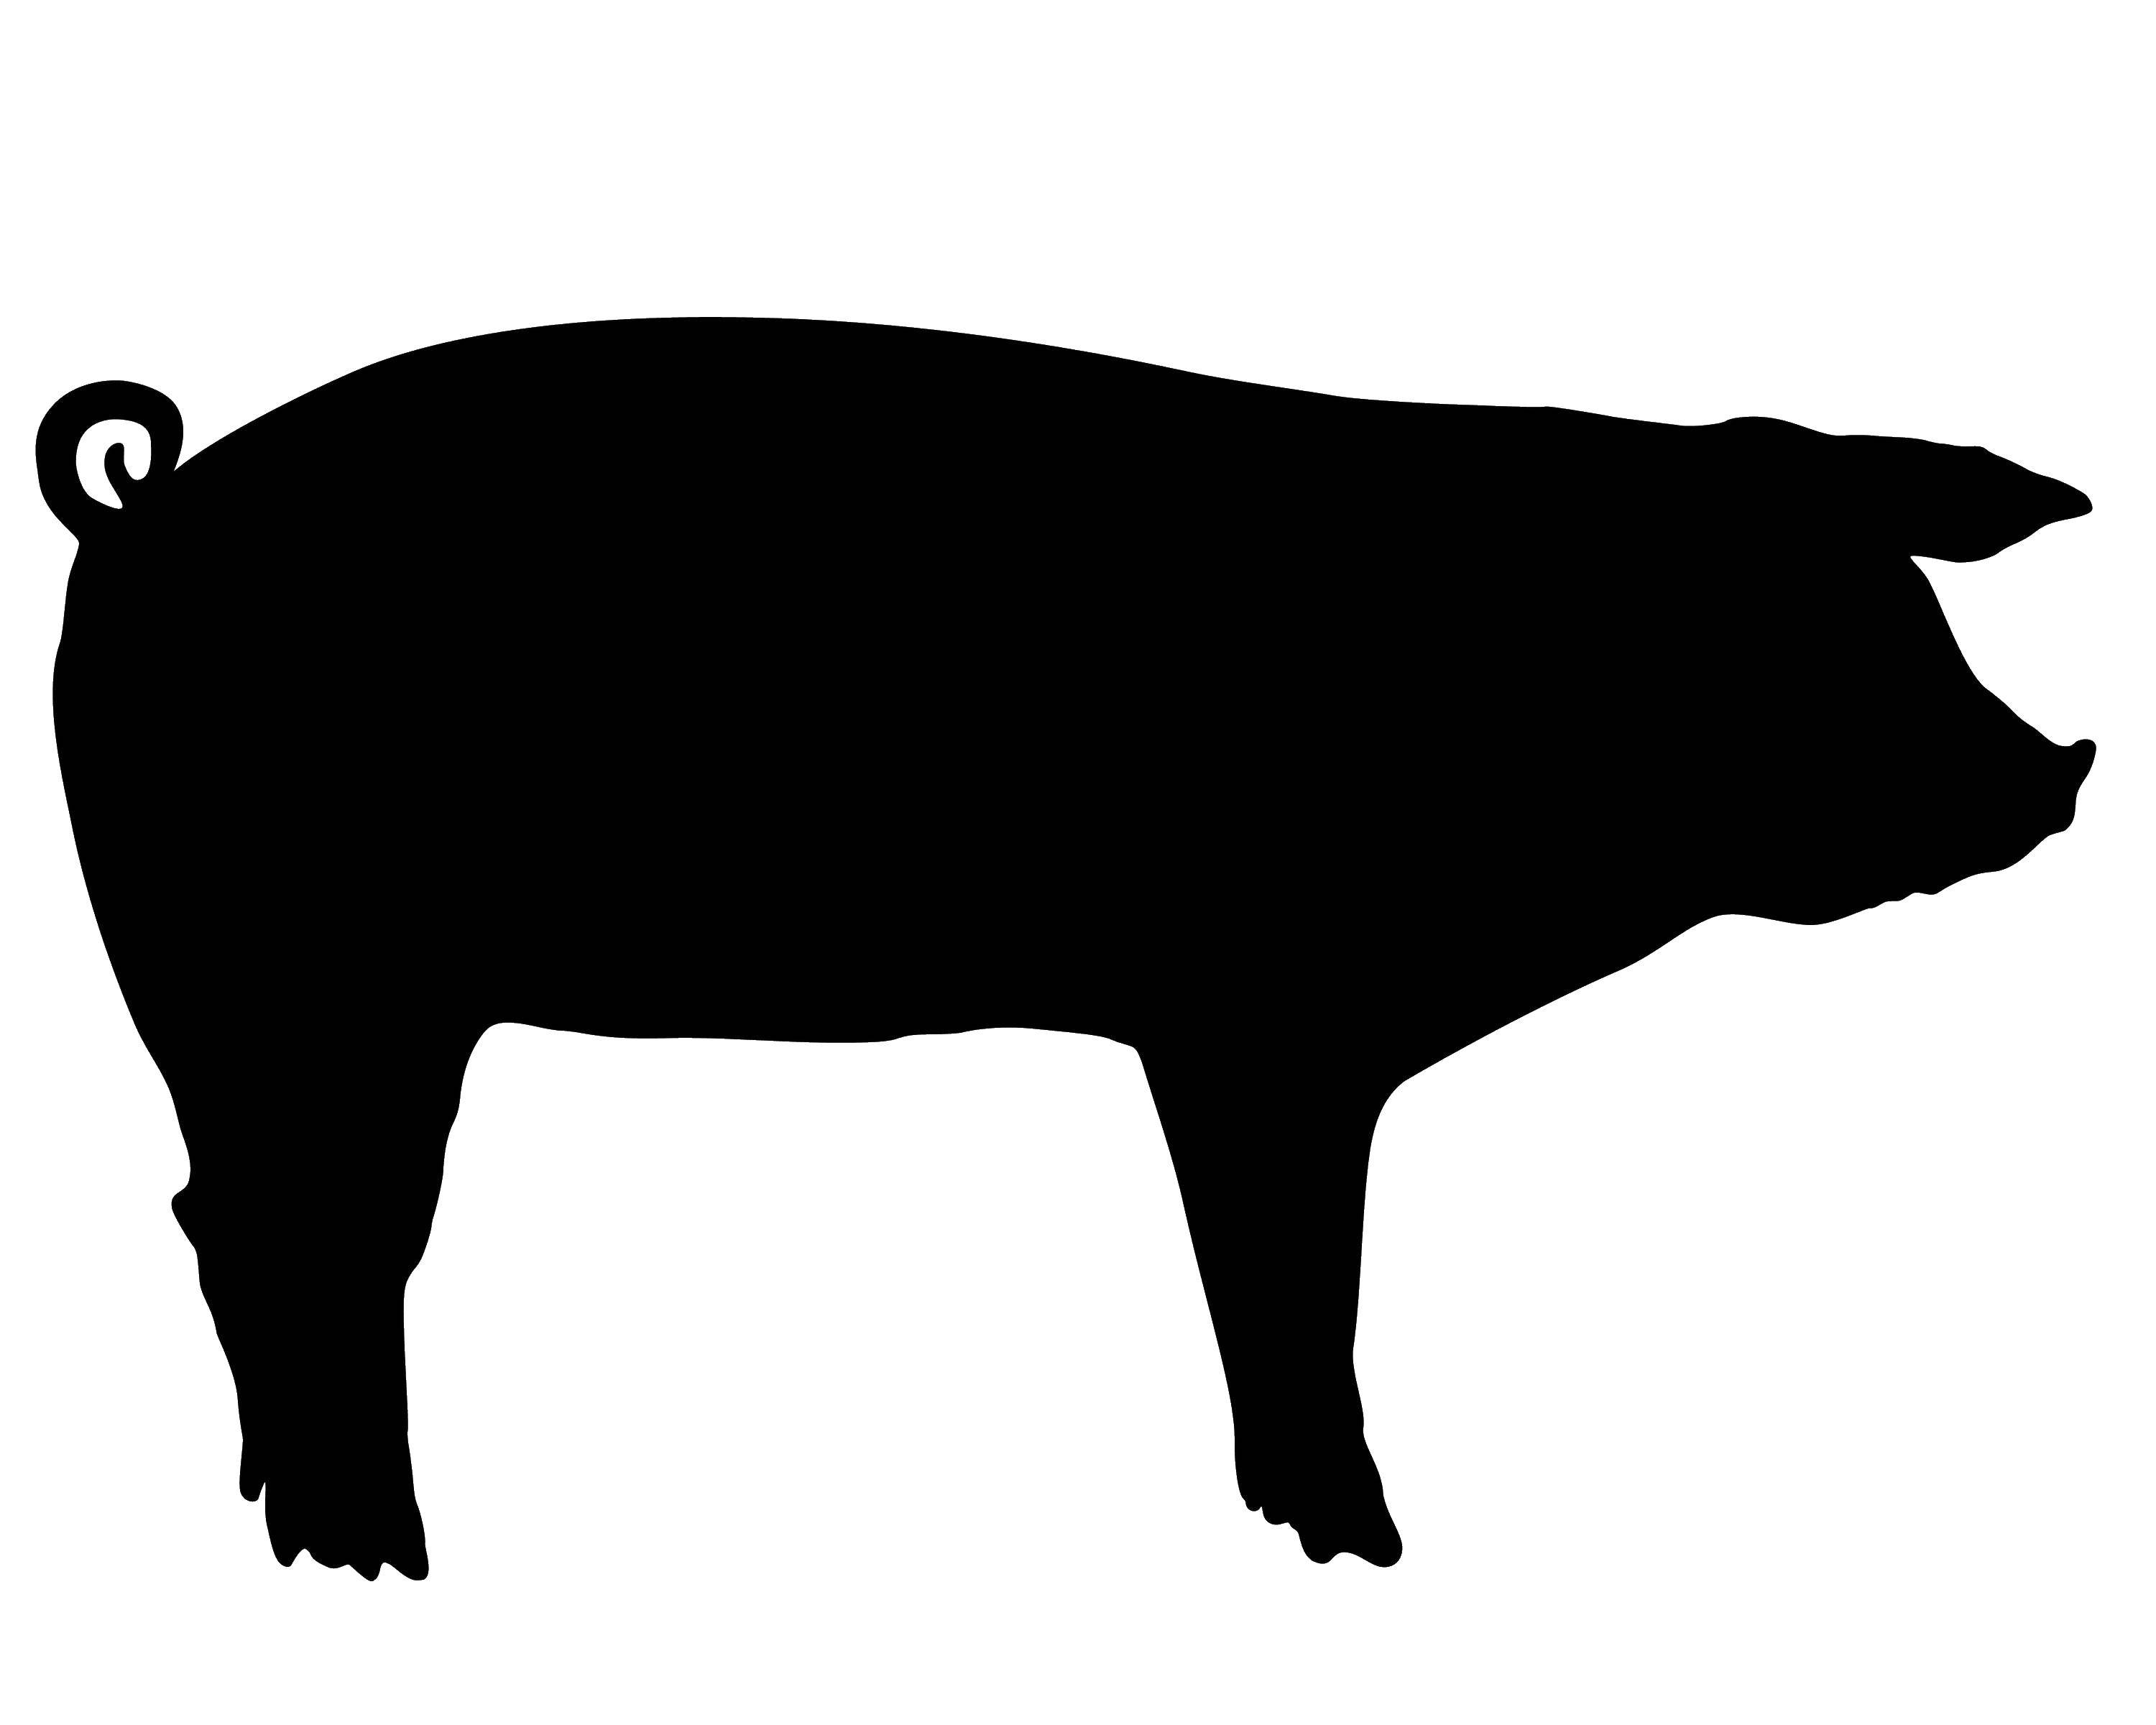 Coloring The outline of a pig to cut. Category The outline of a pig to cut. Tags:  Outline , pig, etc.